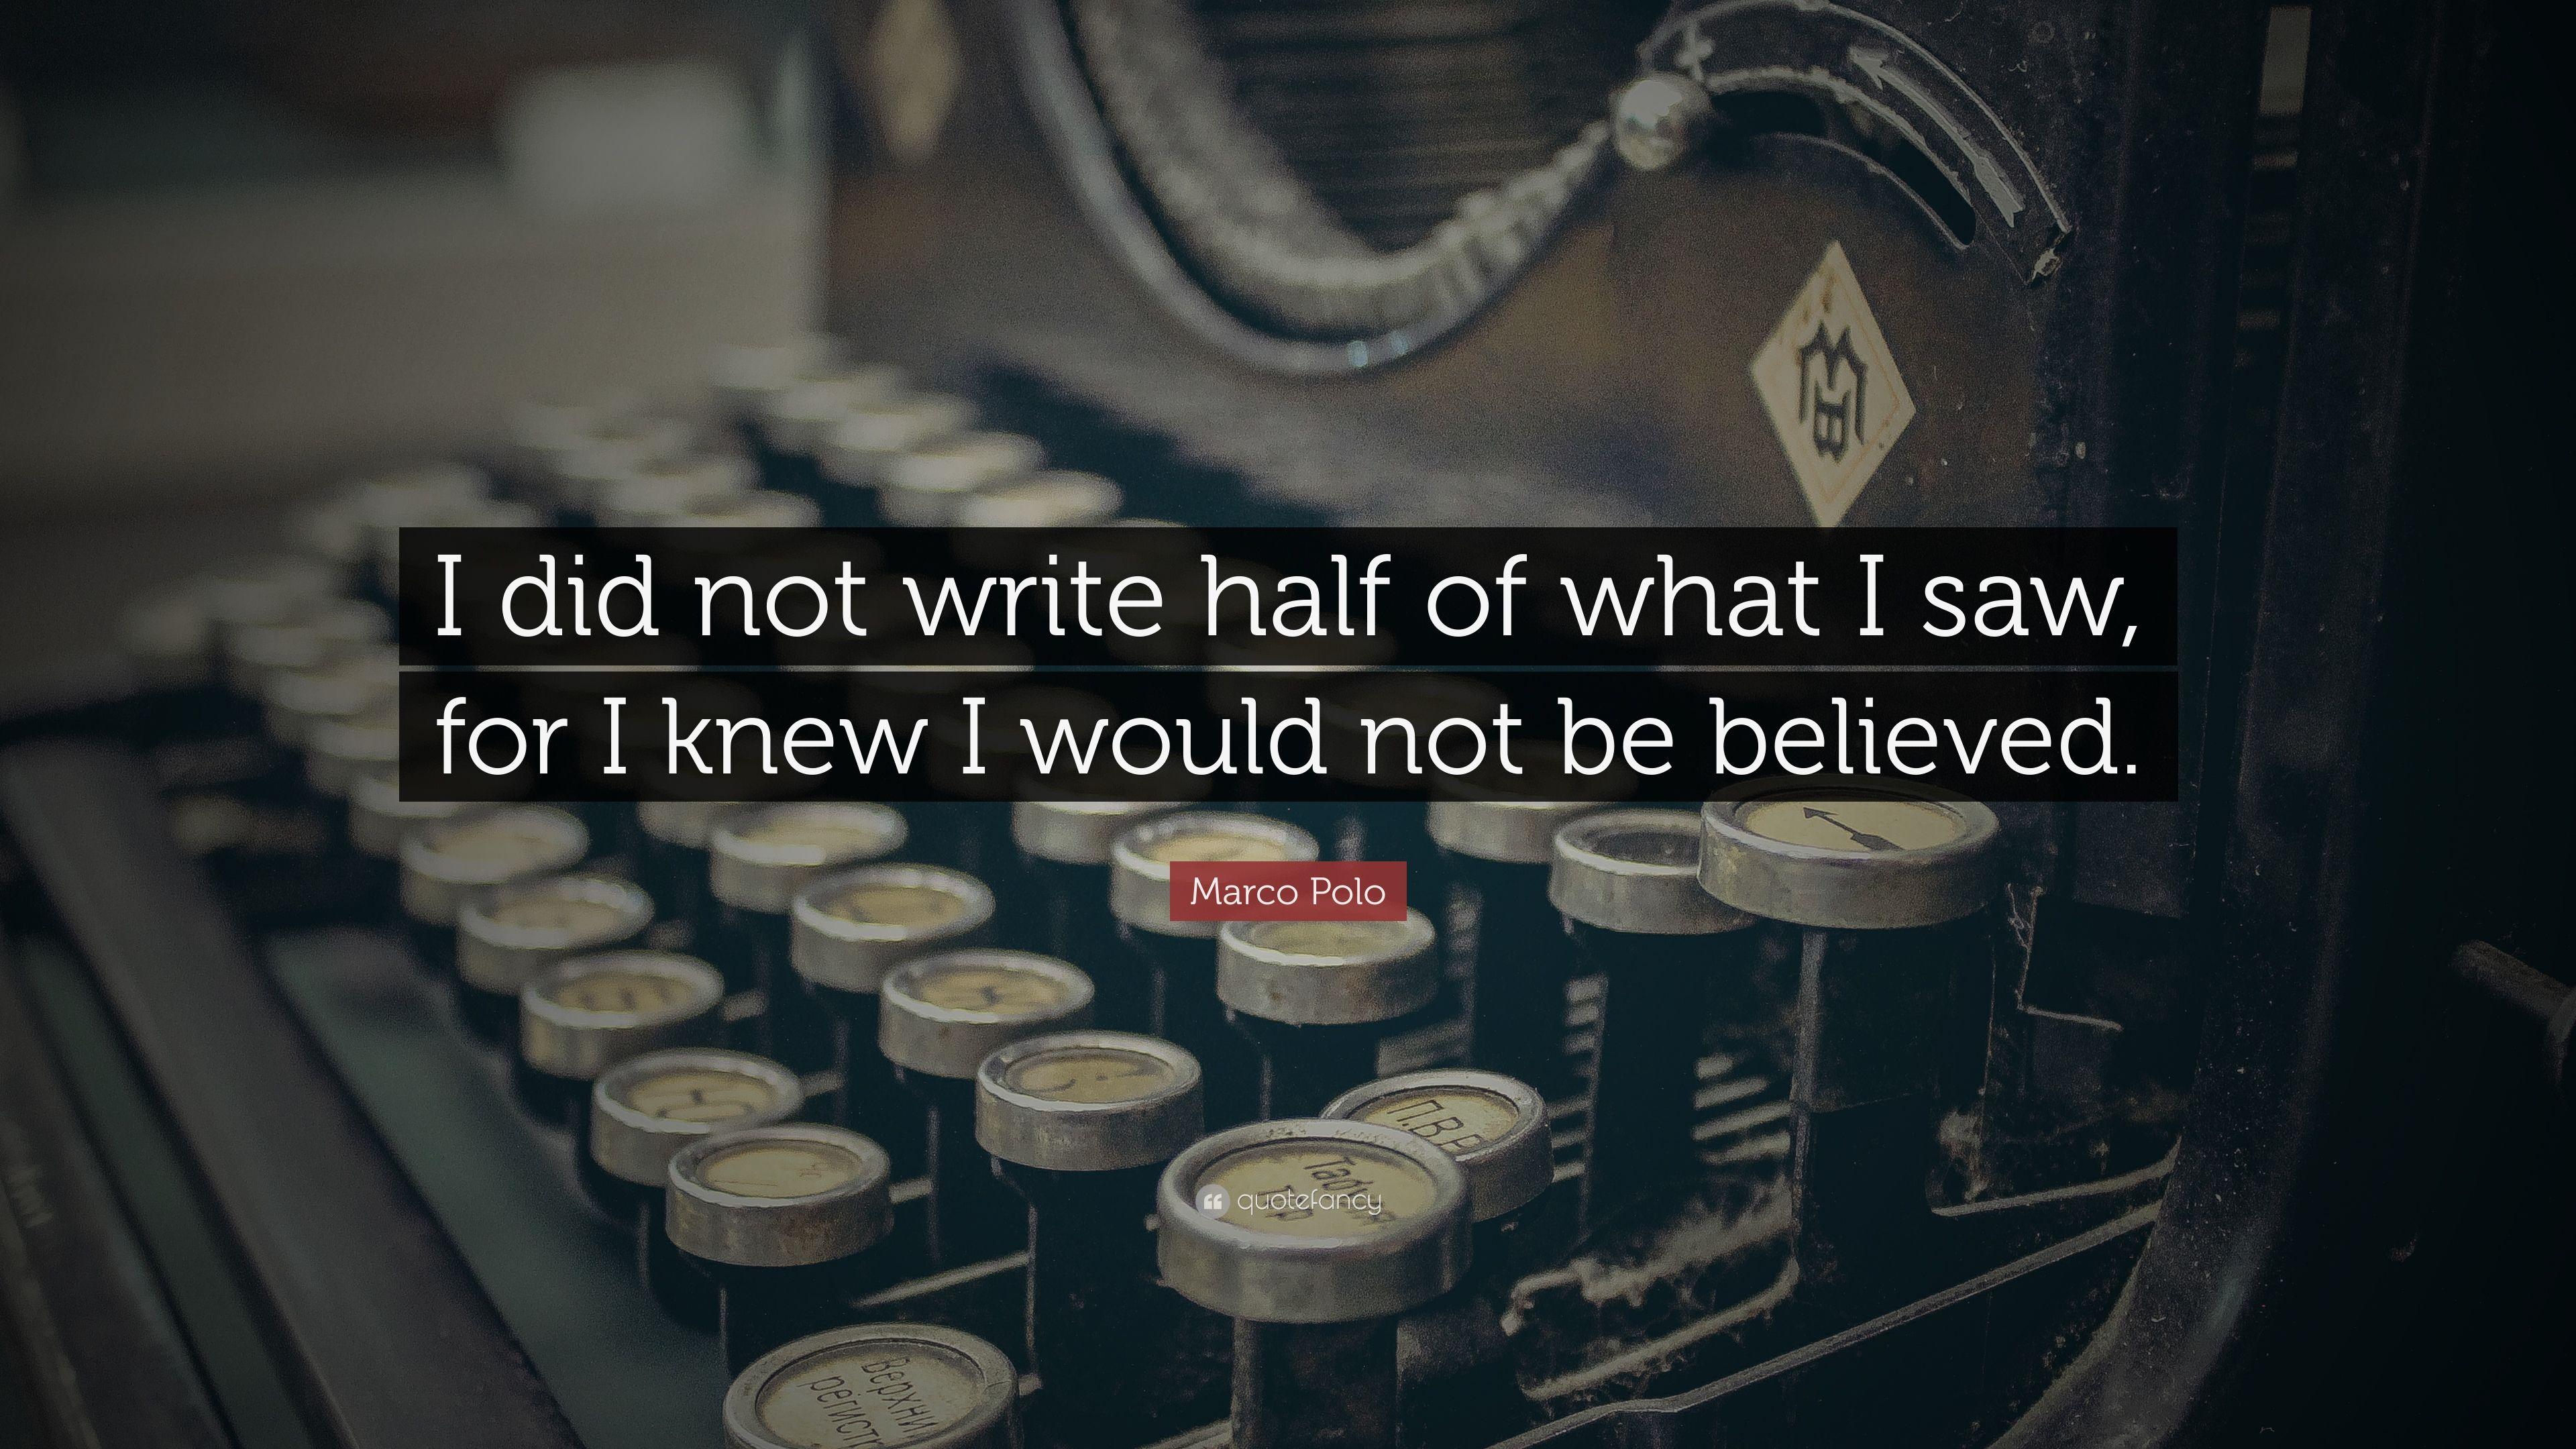 Marco Polo Quote: “I did not write half of what I saw, for I knew I